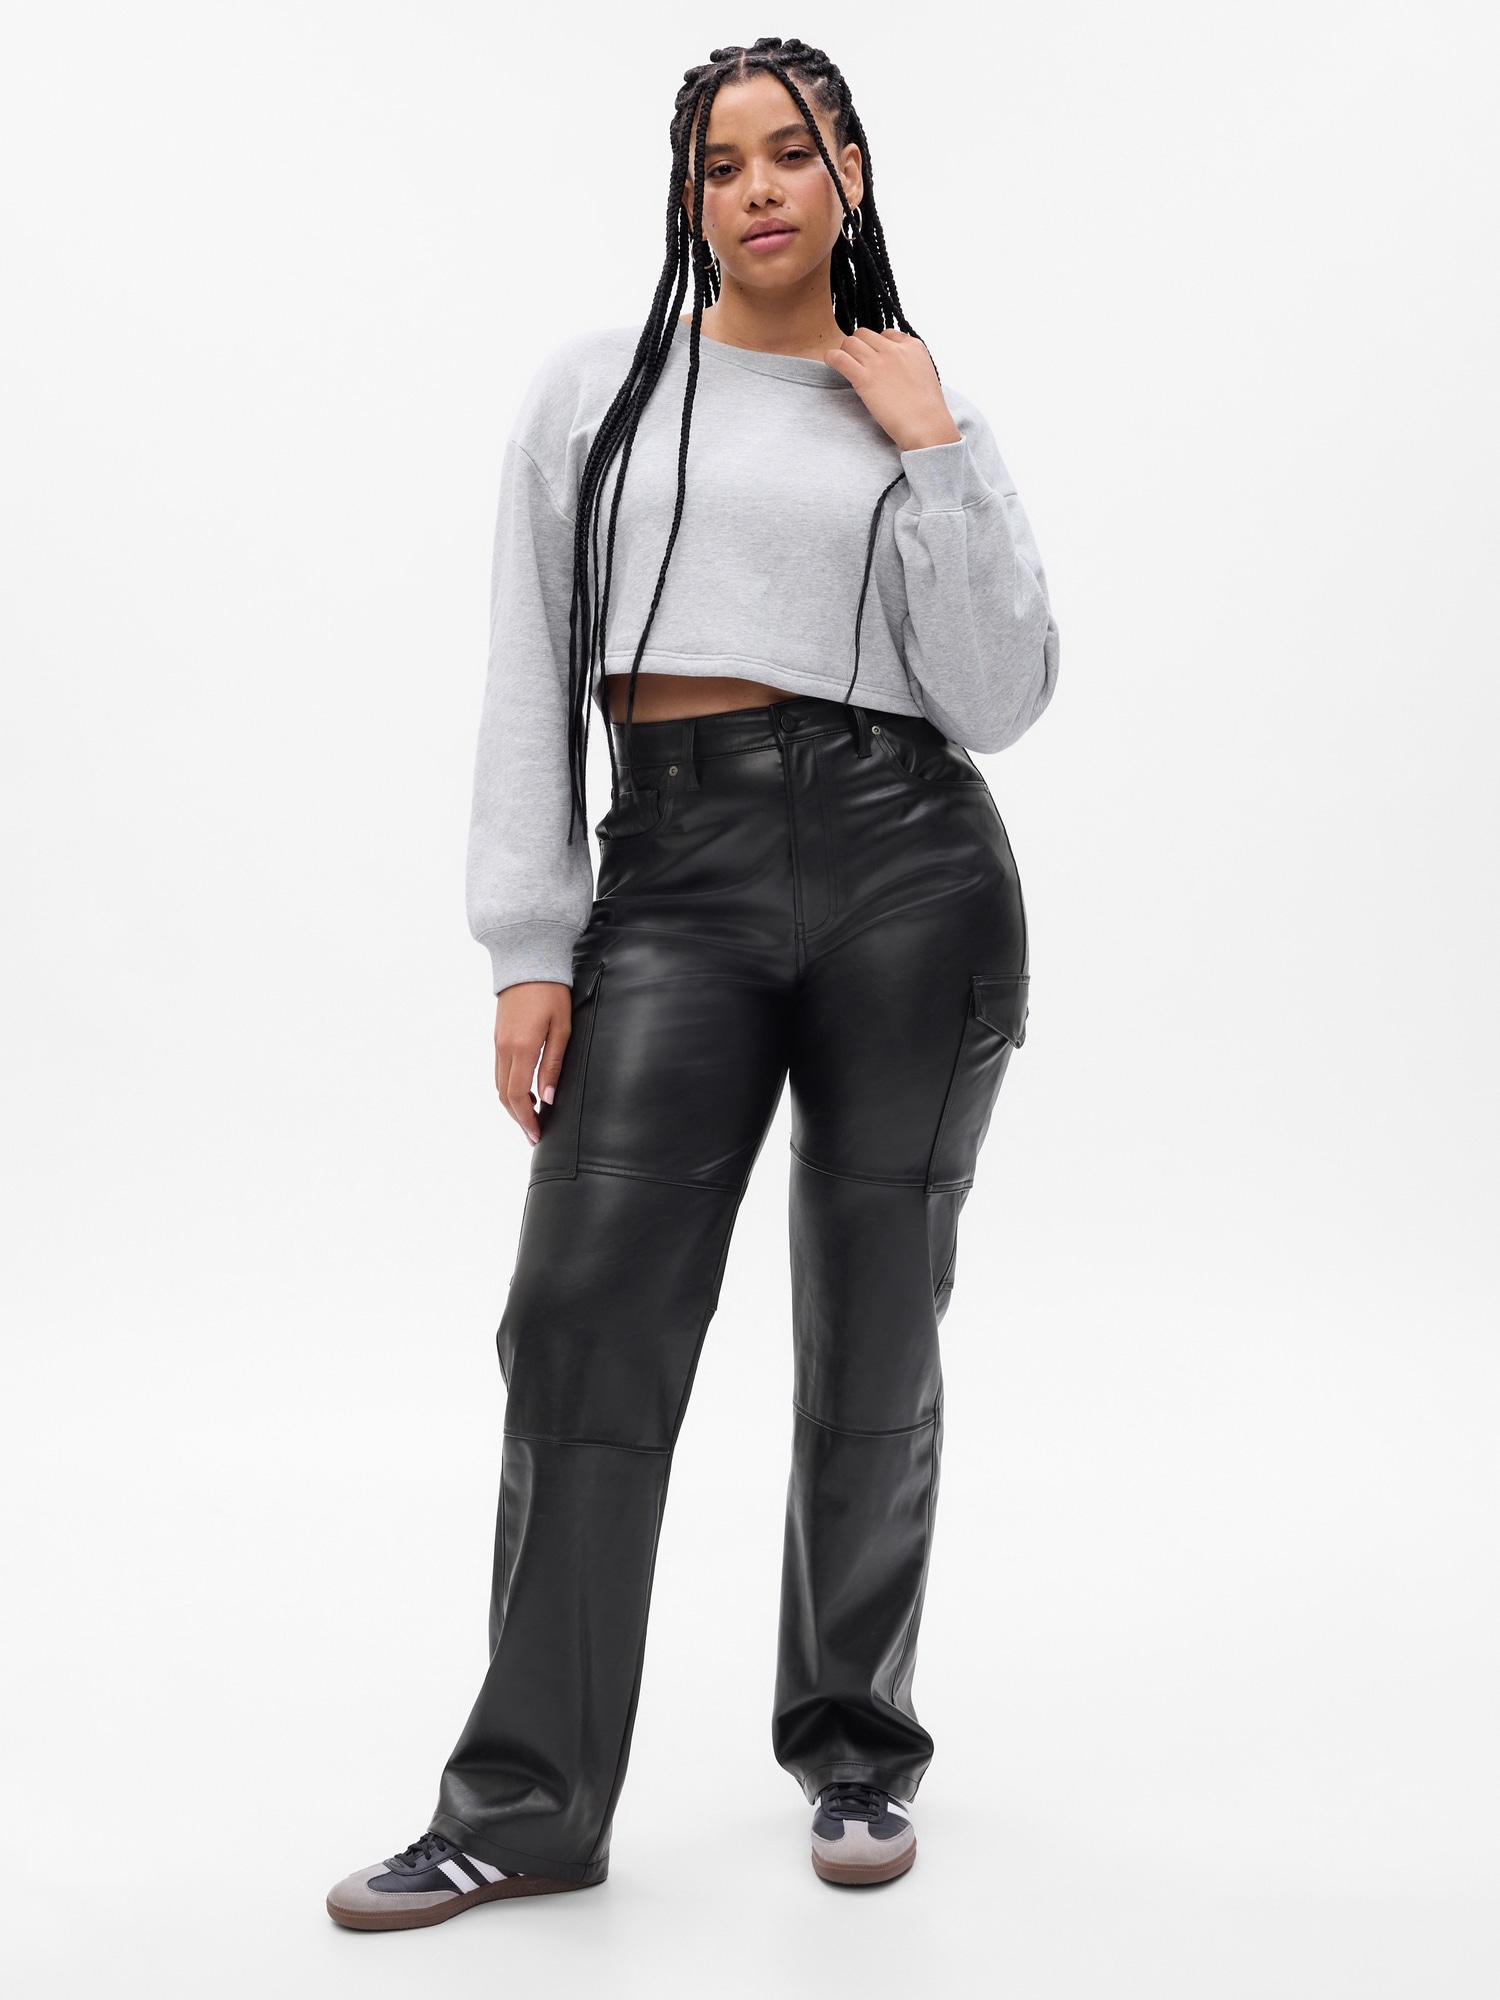 High Waisted Faux Leather '90s Skinny Pant